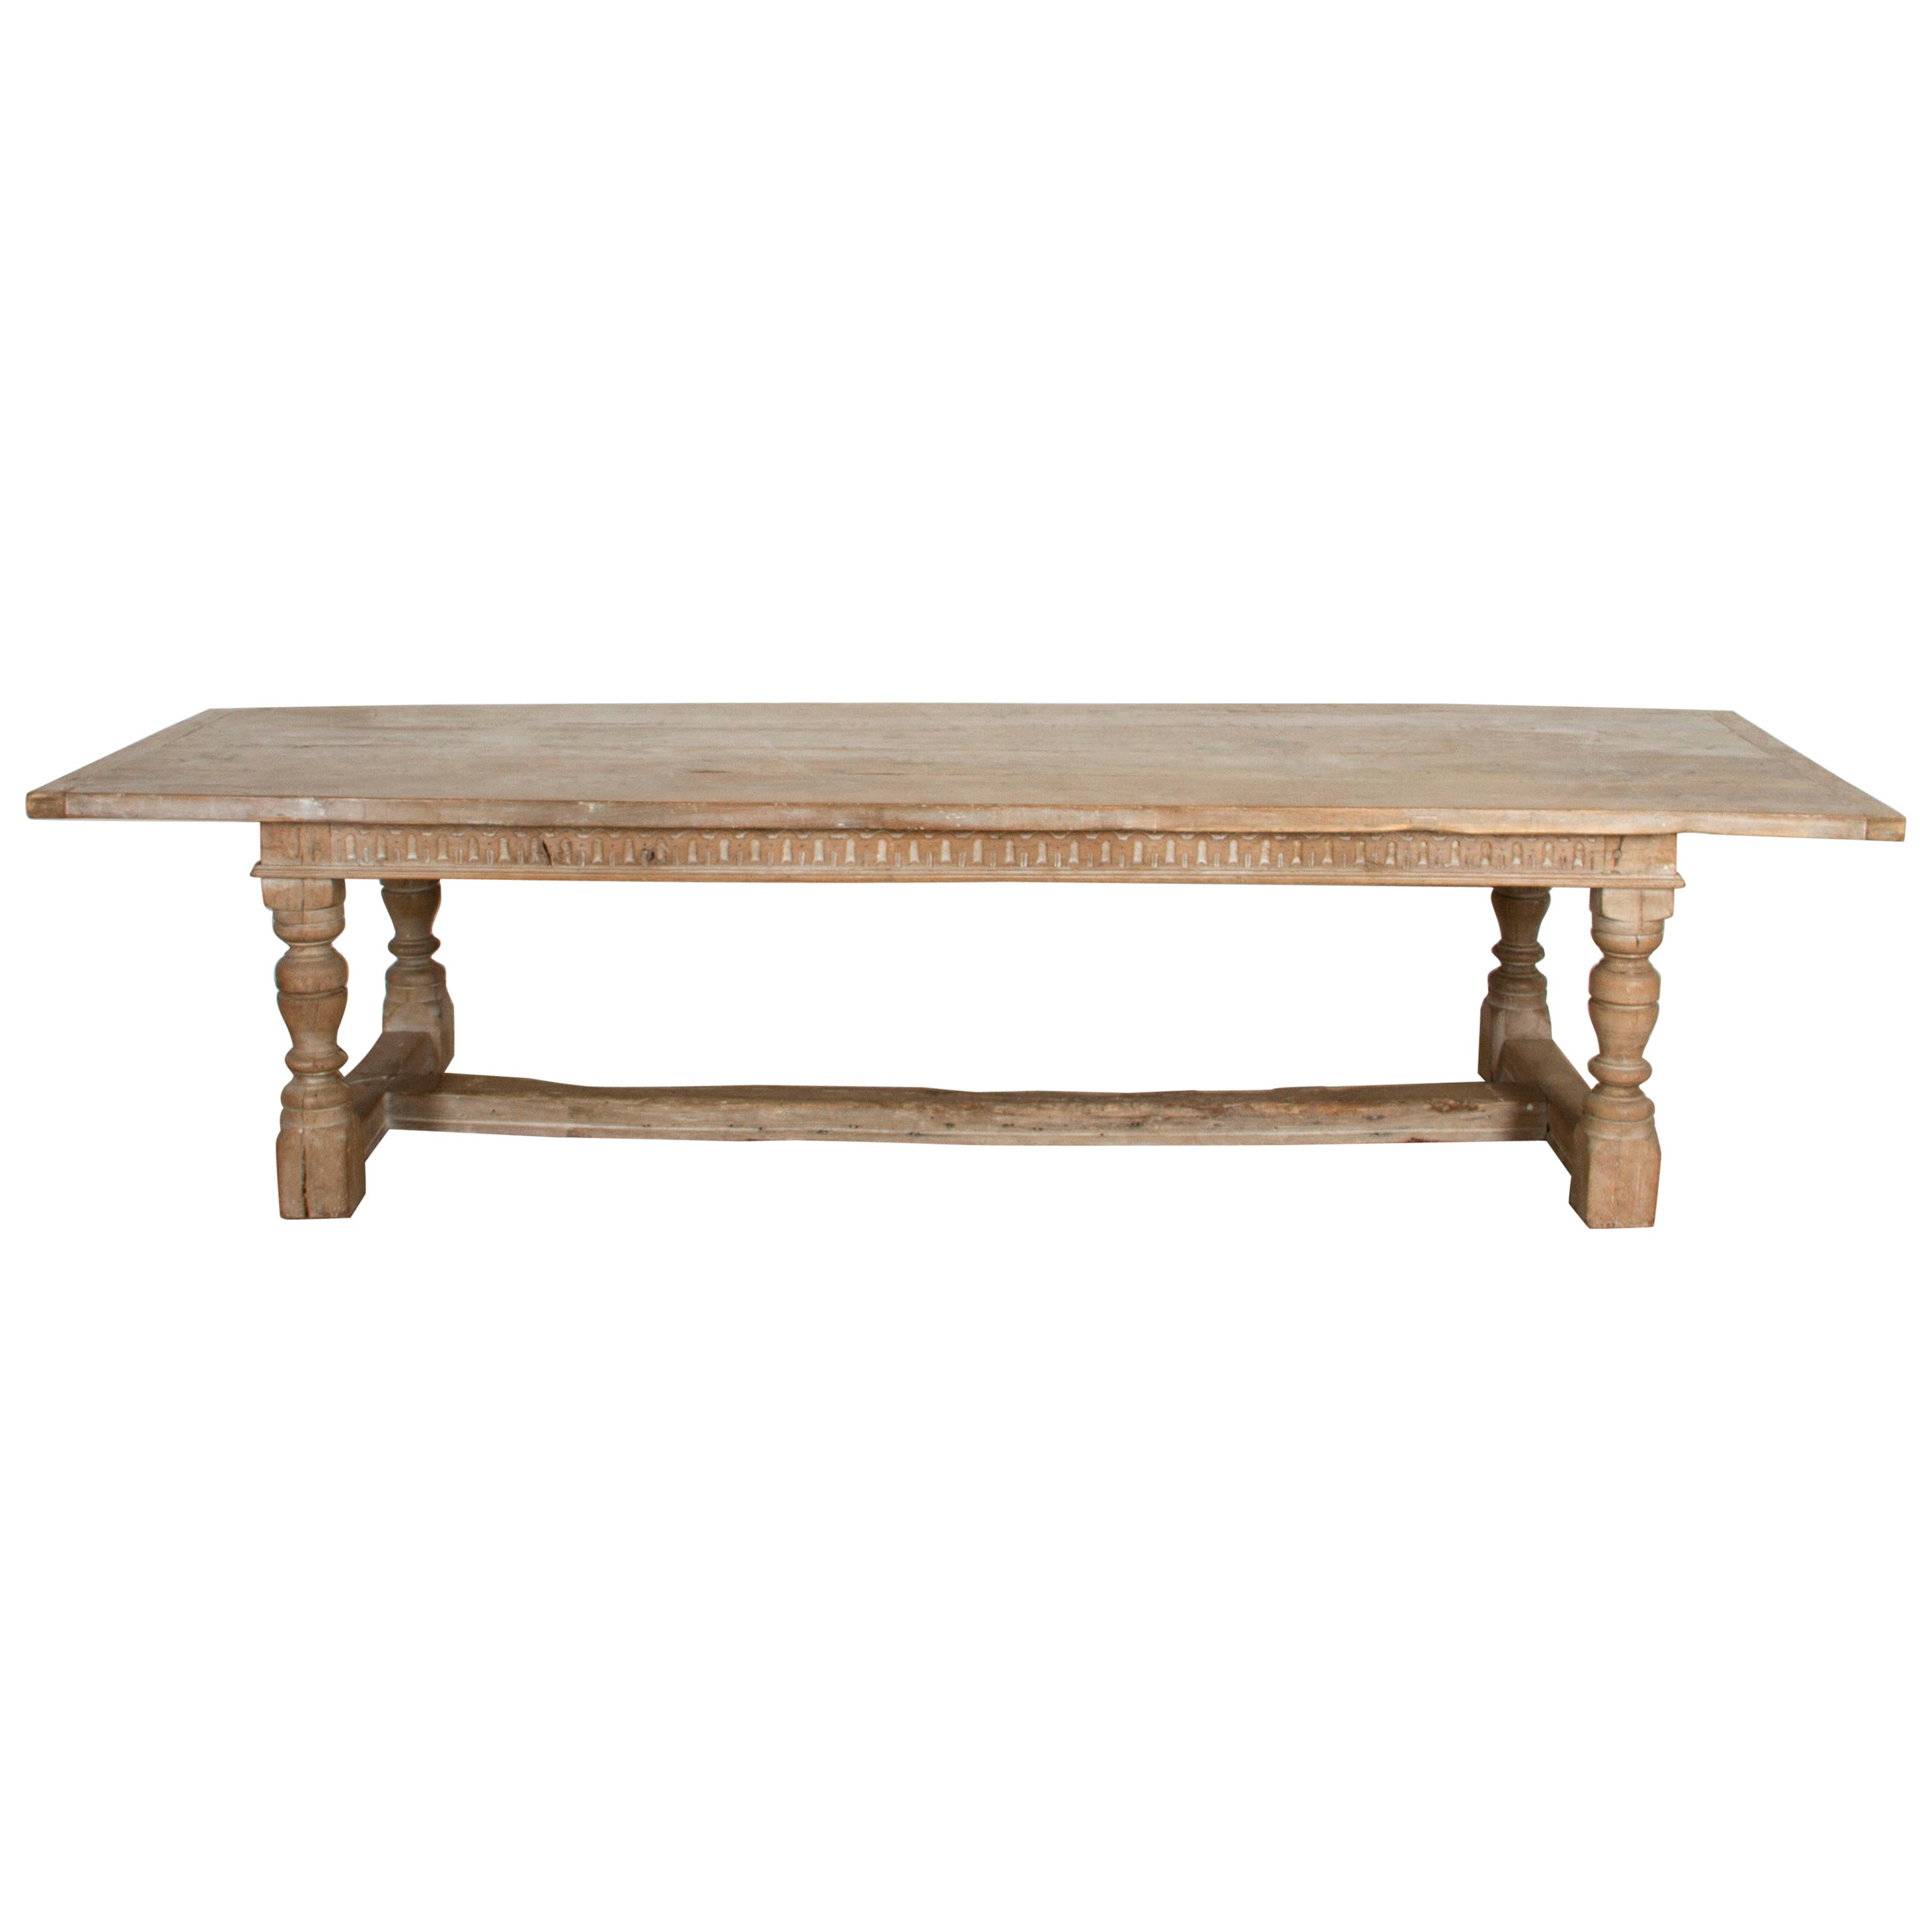 Large Arts & Crafts Refectory Table